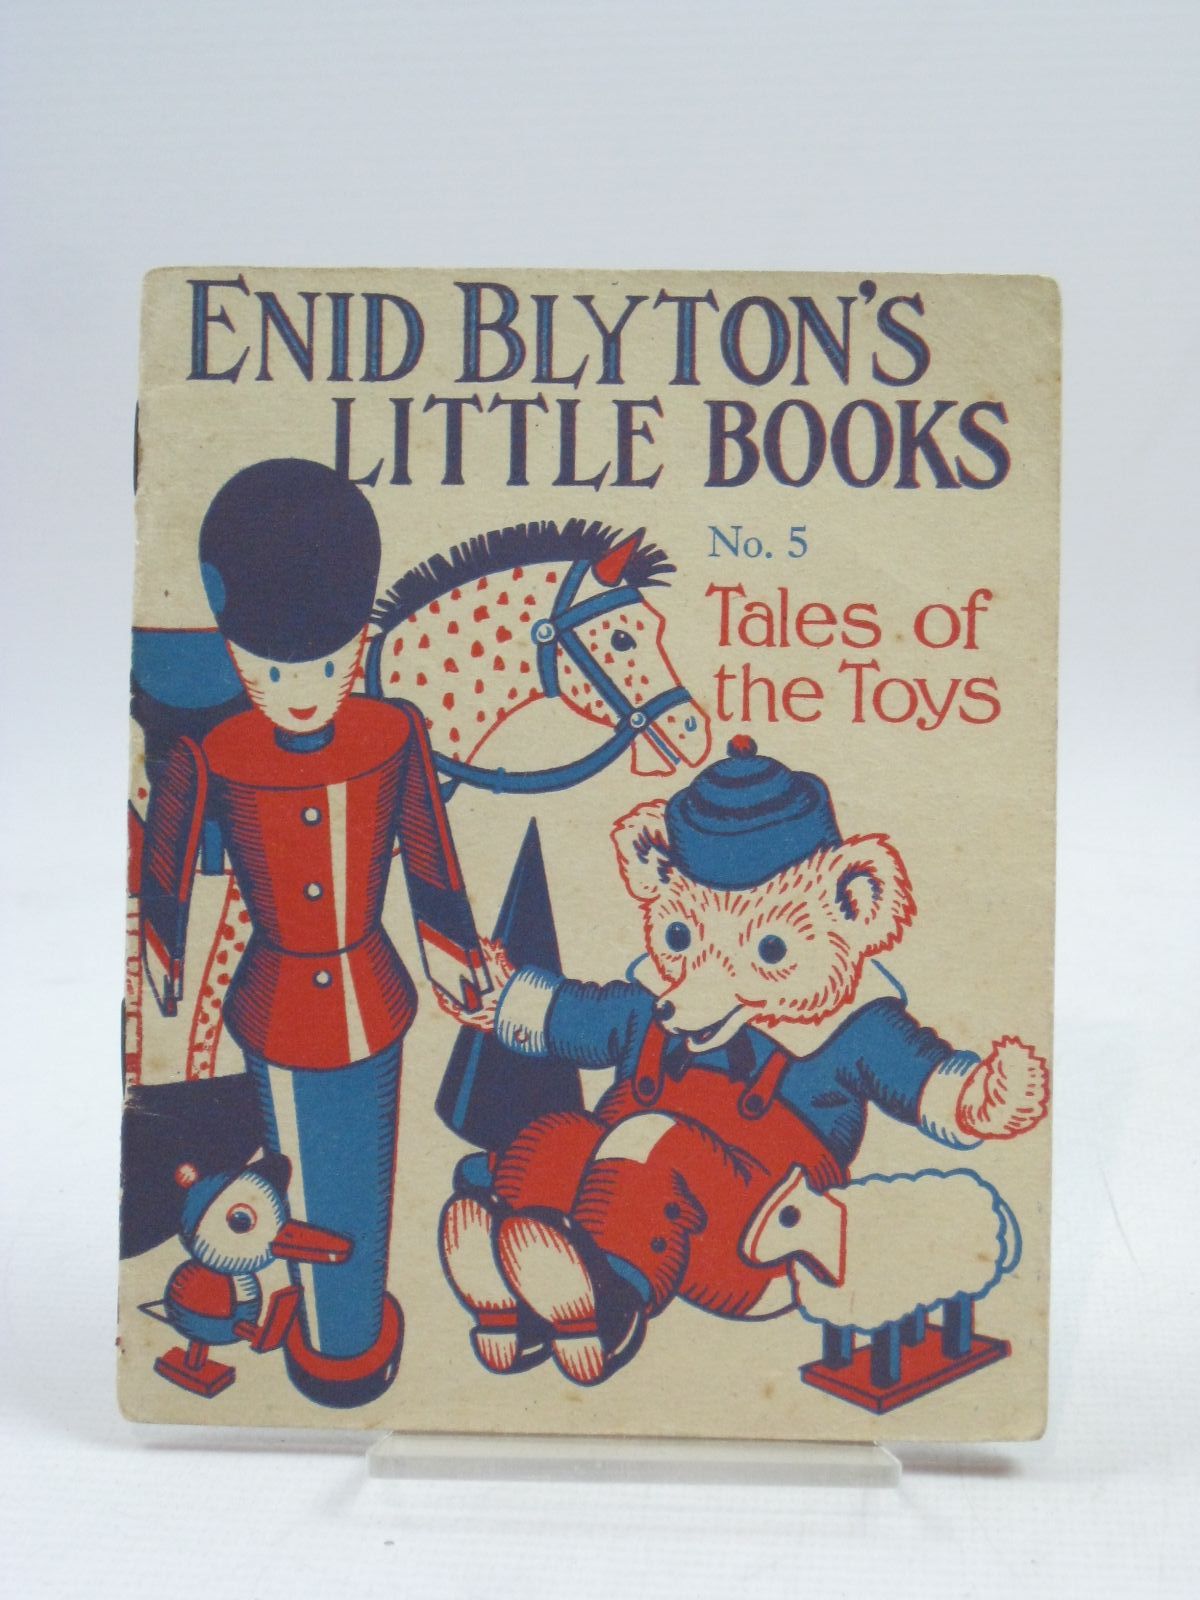 Cover of ENID BLYTON'S LITTLE BOOKS NO. 5 - TALES OF THE TOYS by Enid Blyton